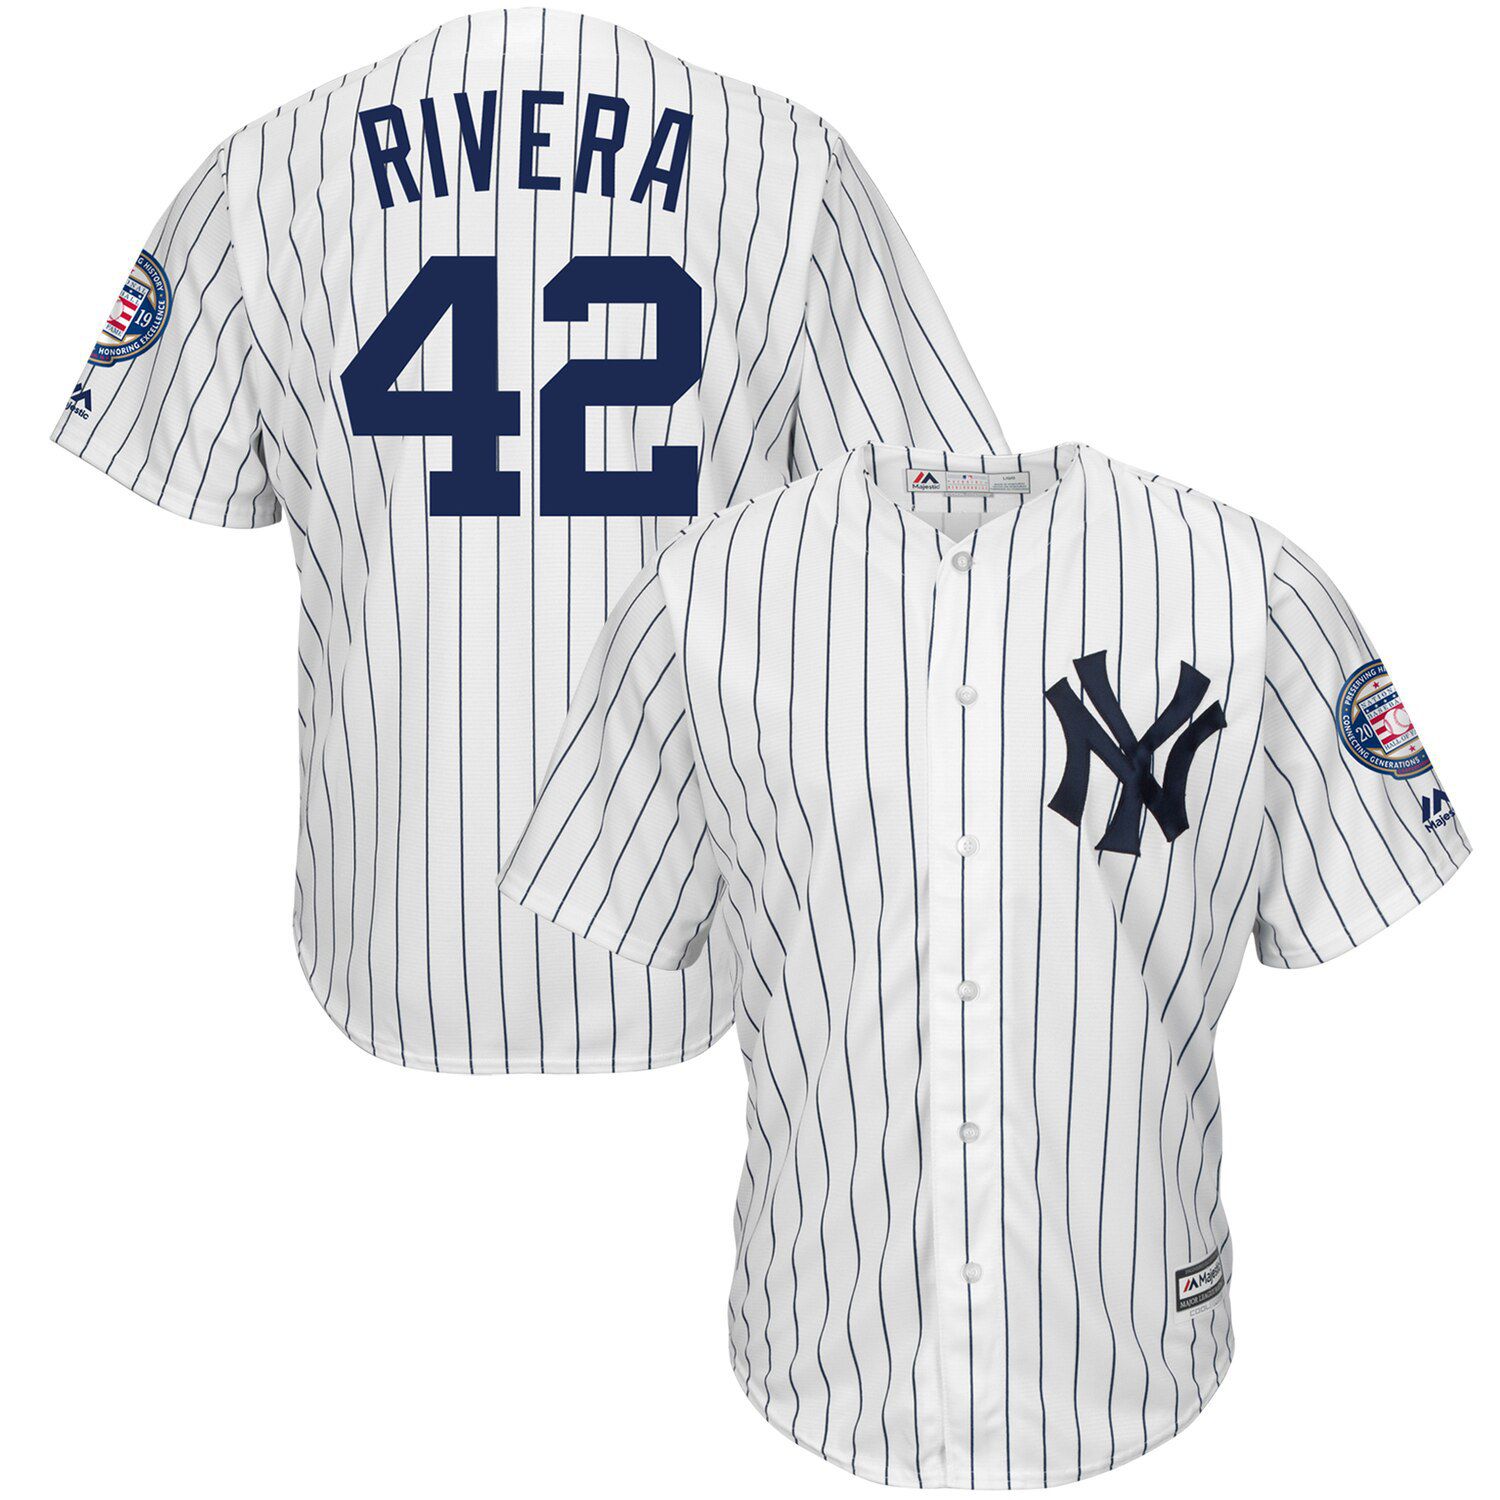 mariano rivera hall of fame jersey